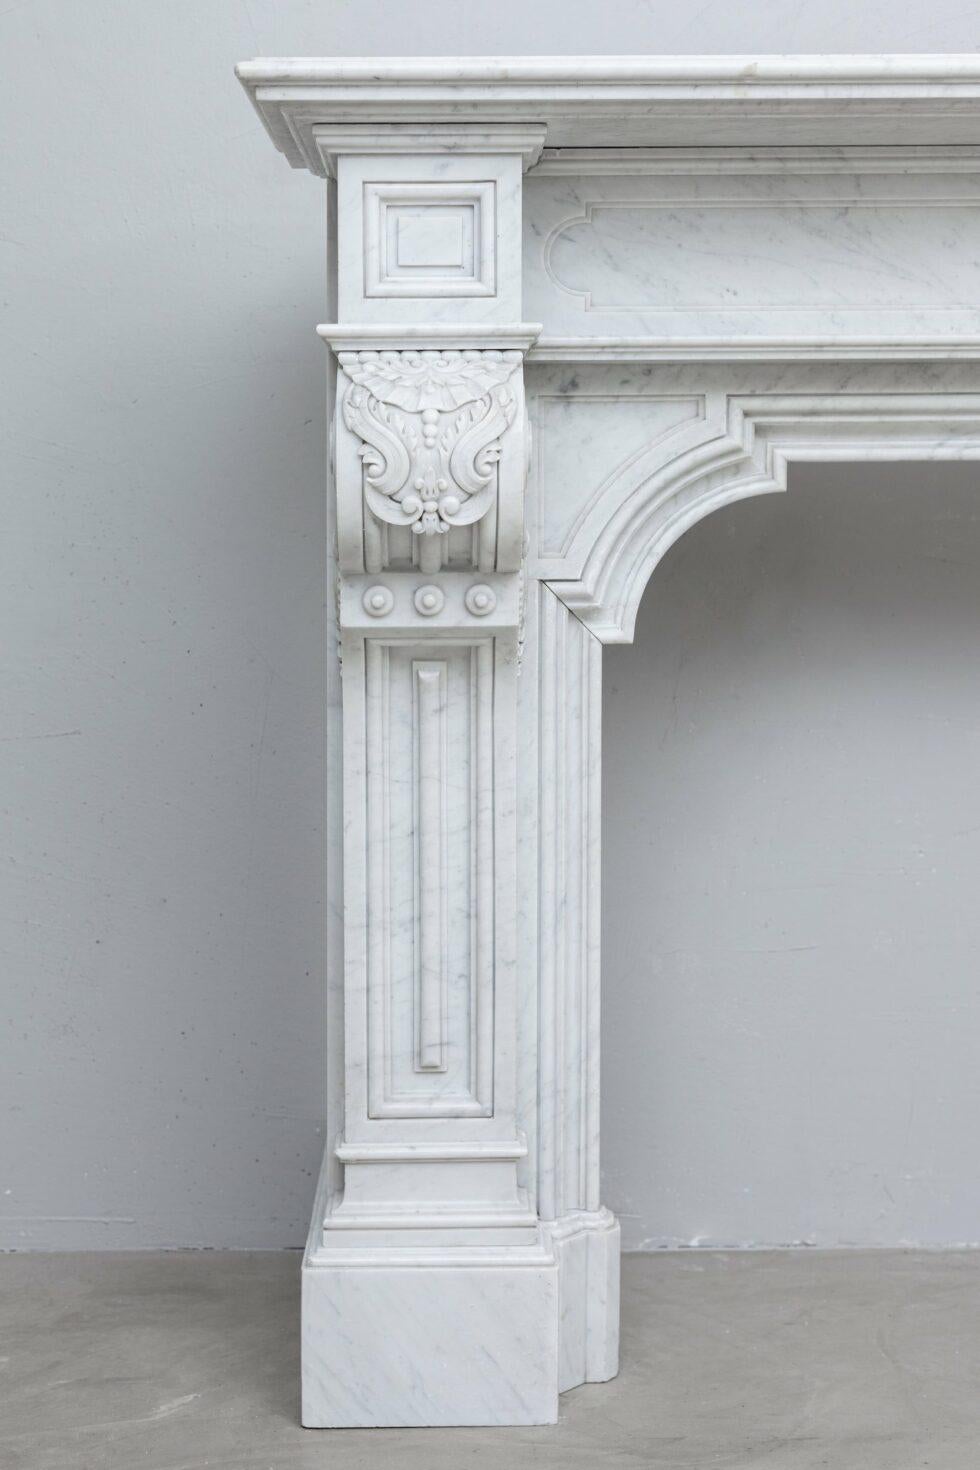 Antique full surround fireplace in Louis XVI style. Made from Carrara marble, this fireplace radiates luxury. This particularly beautiful model comes from a stately Brussels building and is therefore Belgian in origin.
The consoles of this